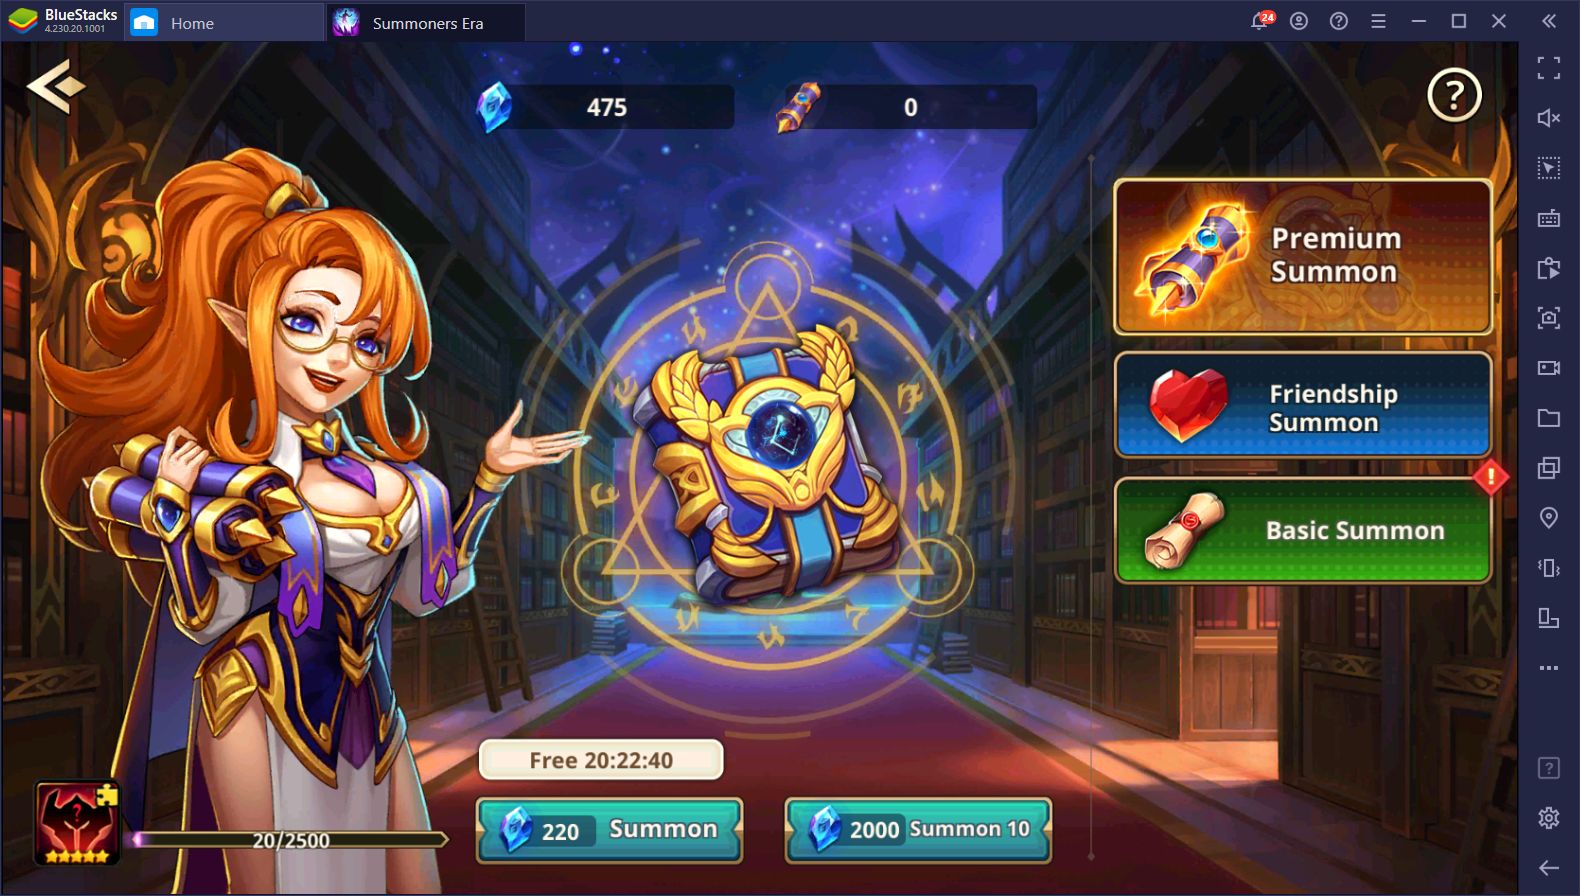 Summoners Era Beginner’s Guide - All You Need to Know to Get Started